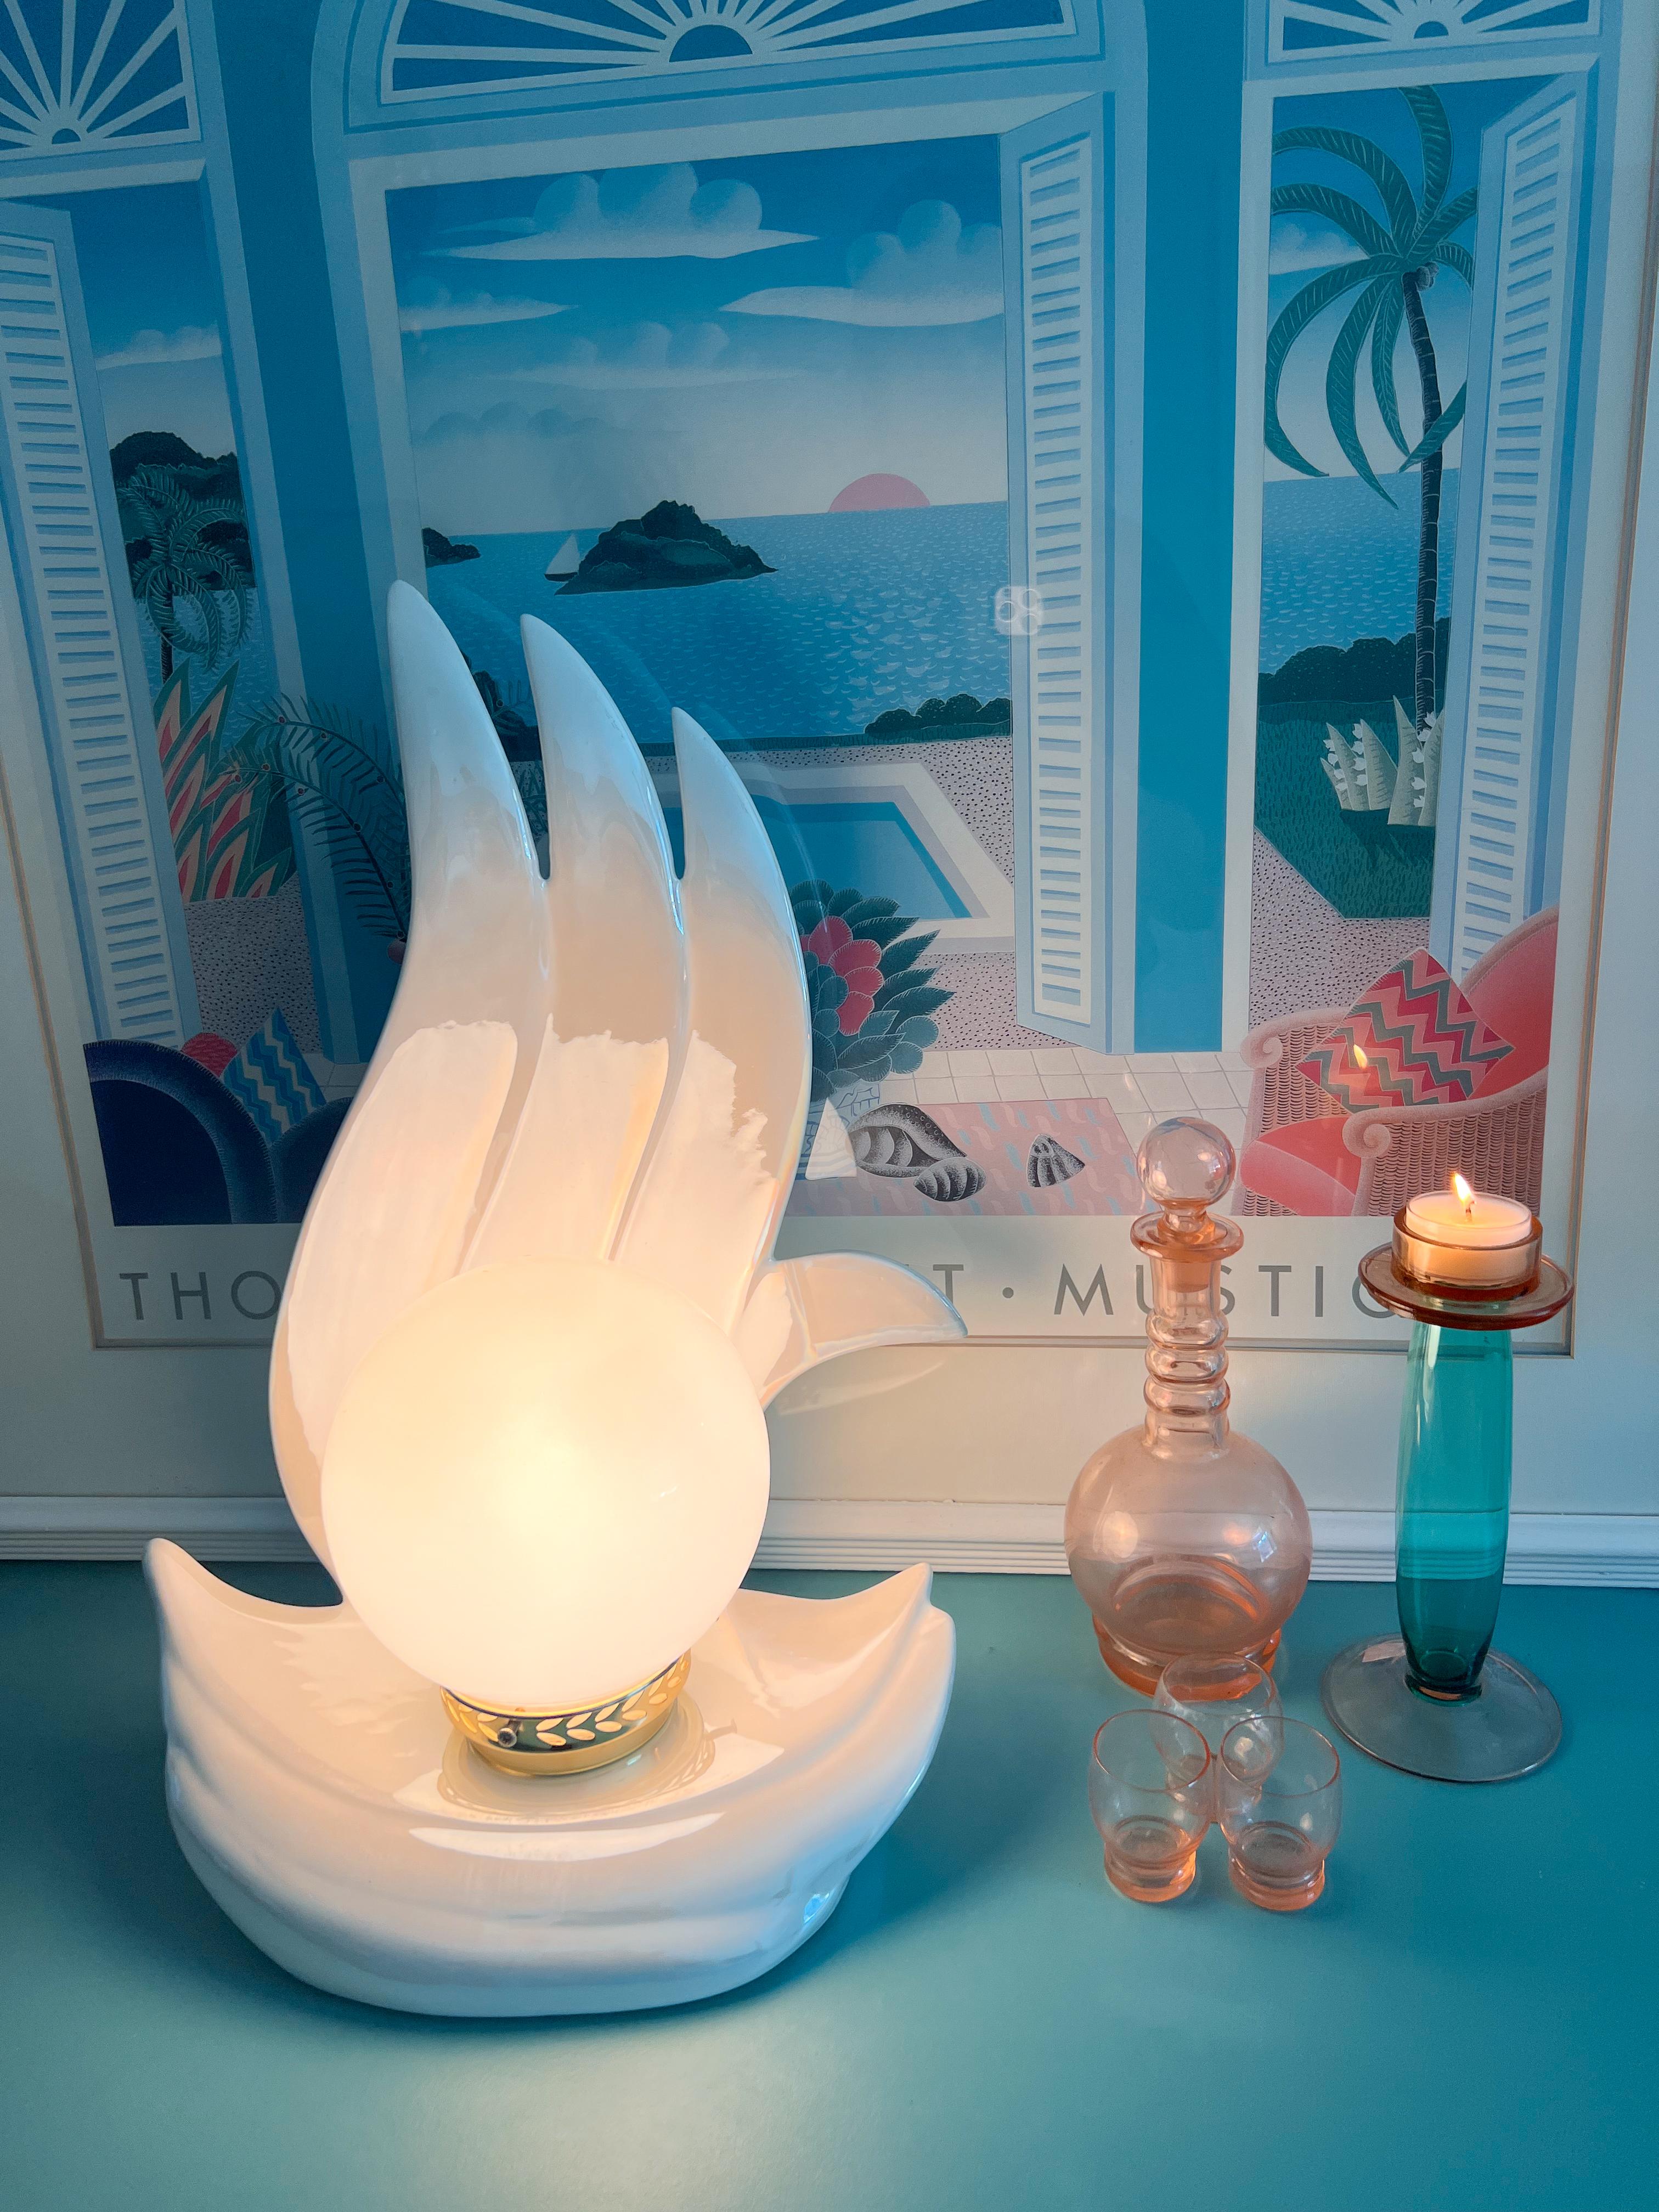 Stunning Art Deco sculptural table lamp with a flame design. The lamp have a white ceramic glaze with an iridescent finish. The lamp is in amazing condition, free from any chips, cracks, or scratches.
Wired in EU plug.